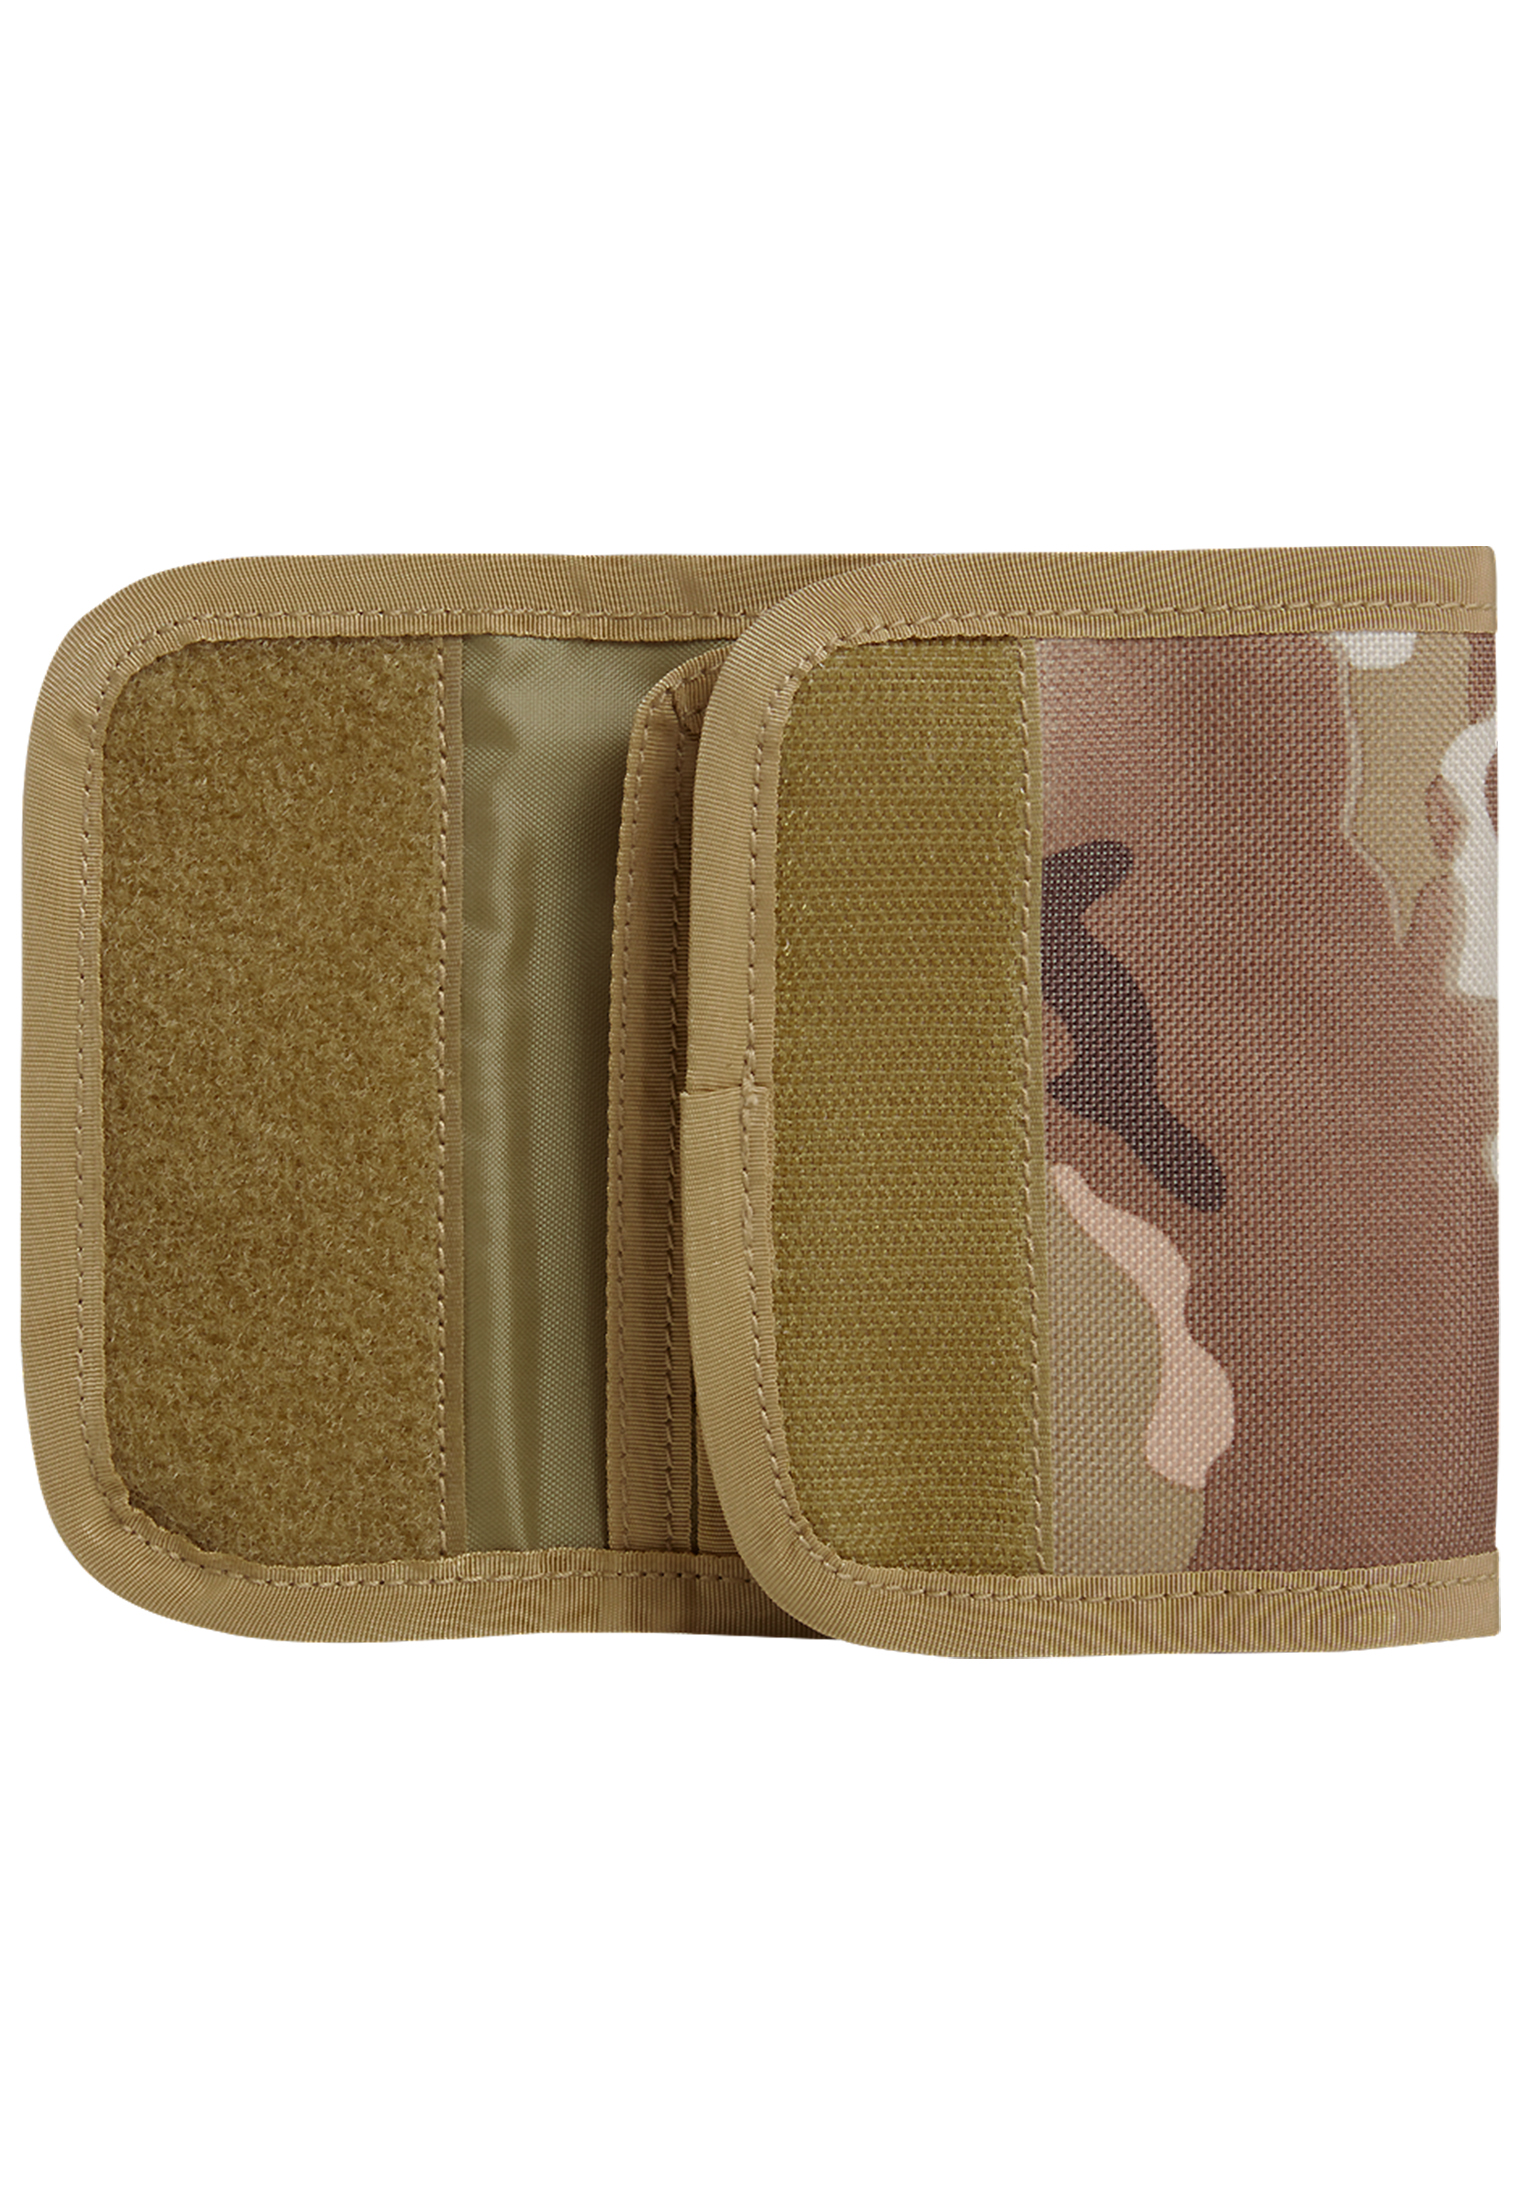 Accessoires wallet five in Farbe tactical camo